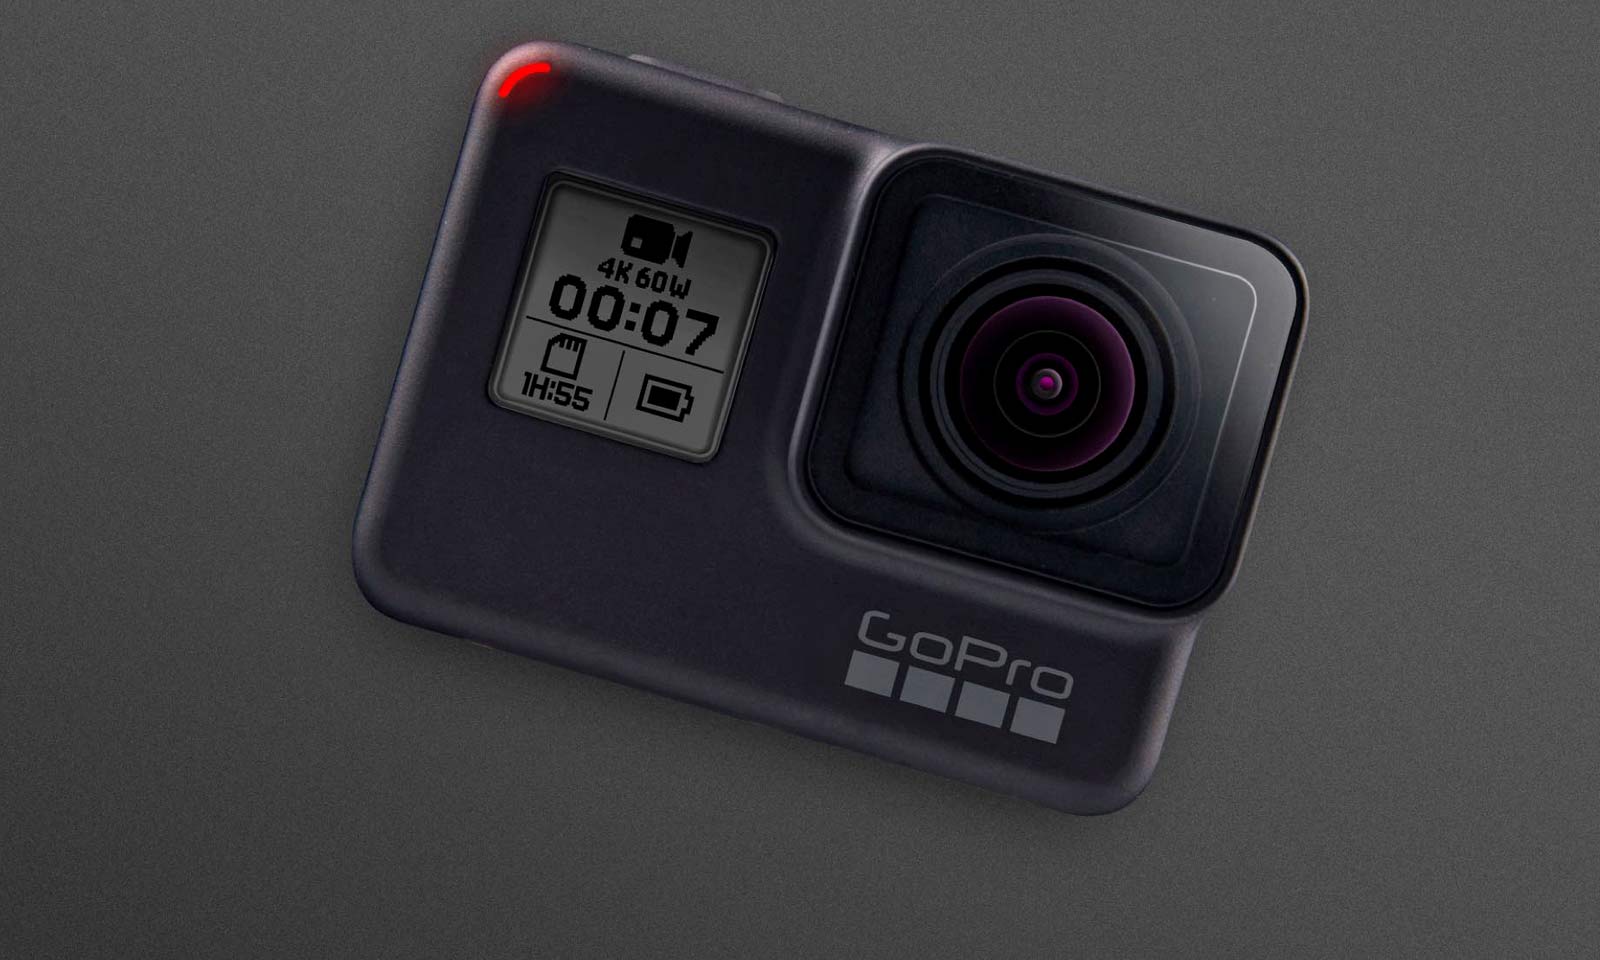 GoPro Hero7 Black steps up HyperSmooth stabilization, voice control & a lower price